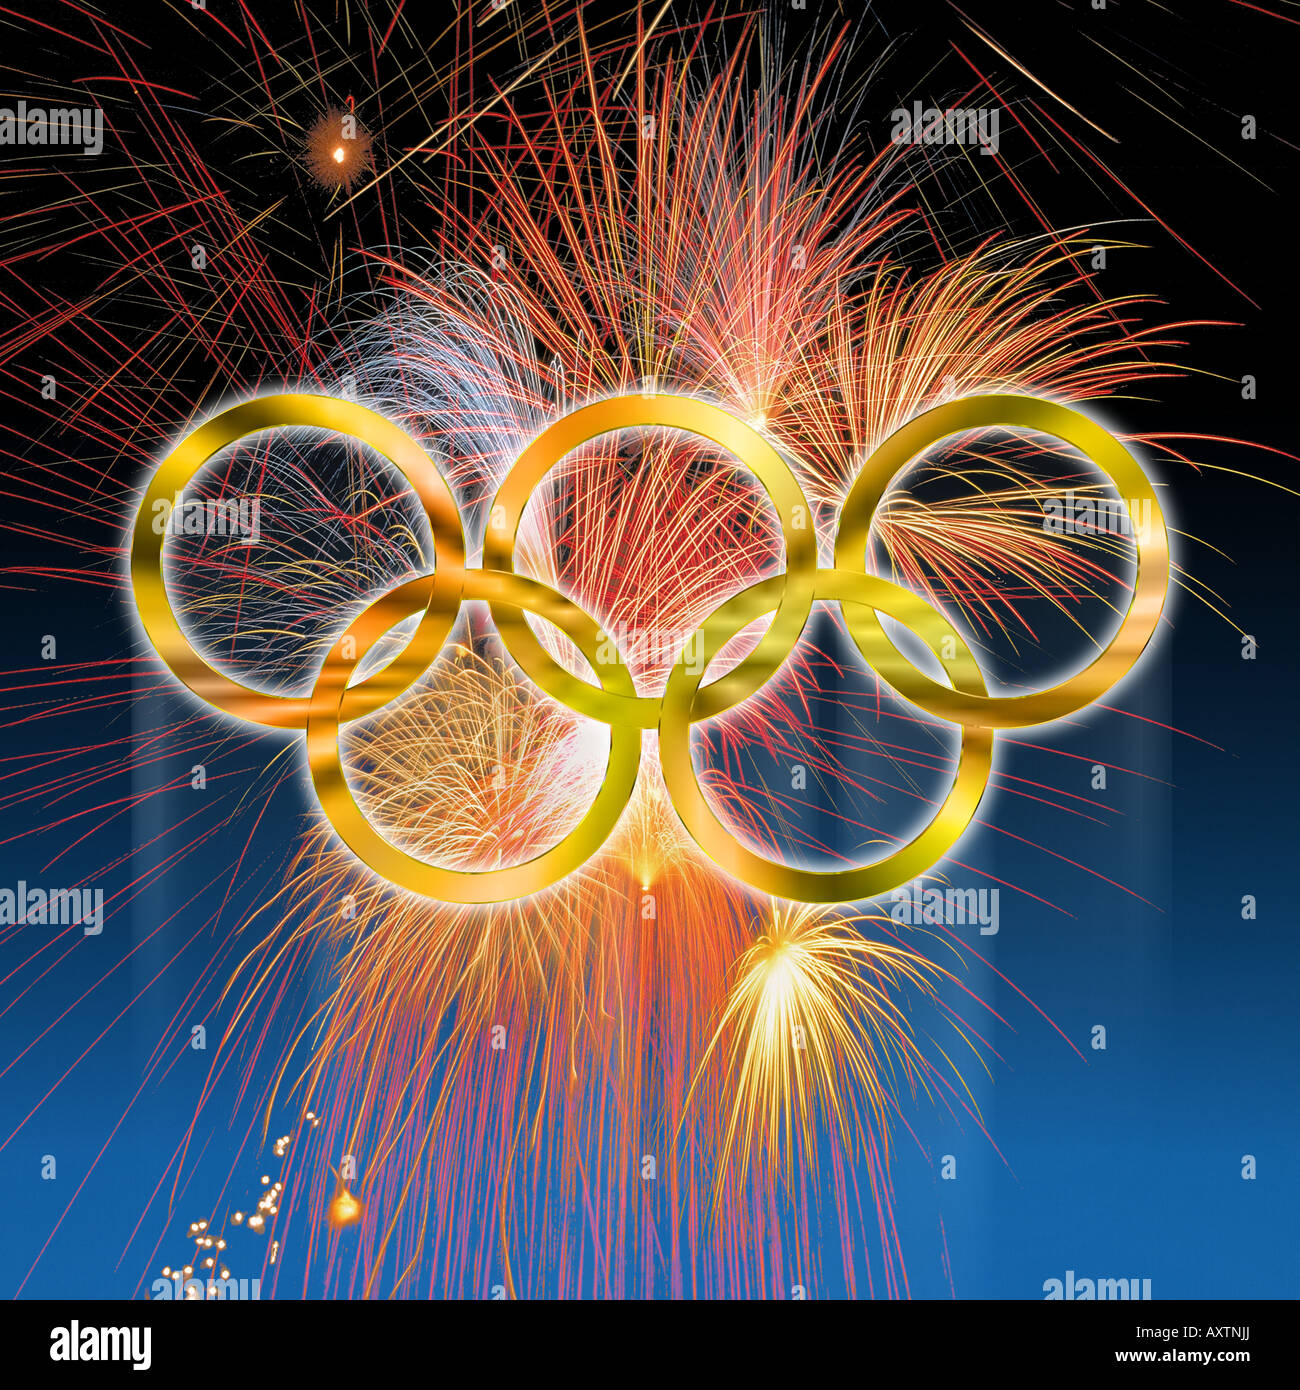 Golden olympic rings against fireworks over deep blue gradated background Stock Photo